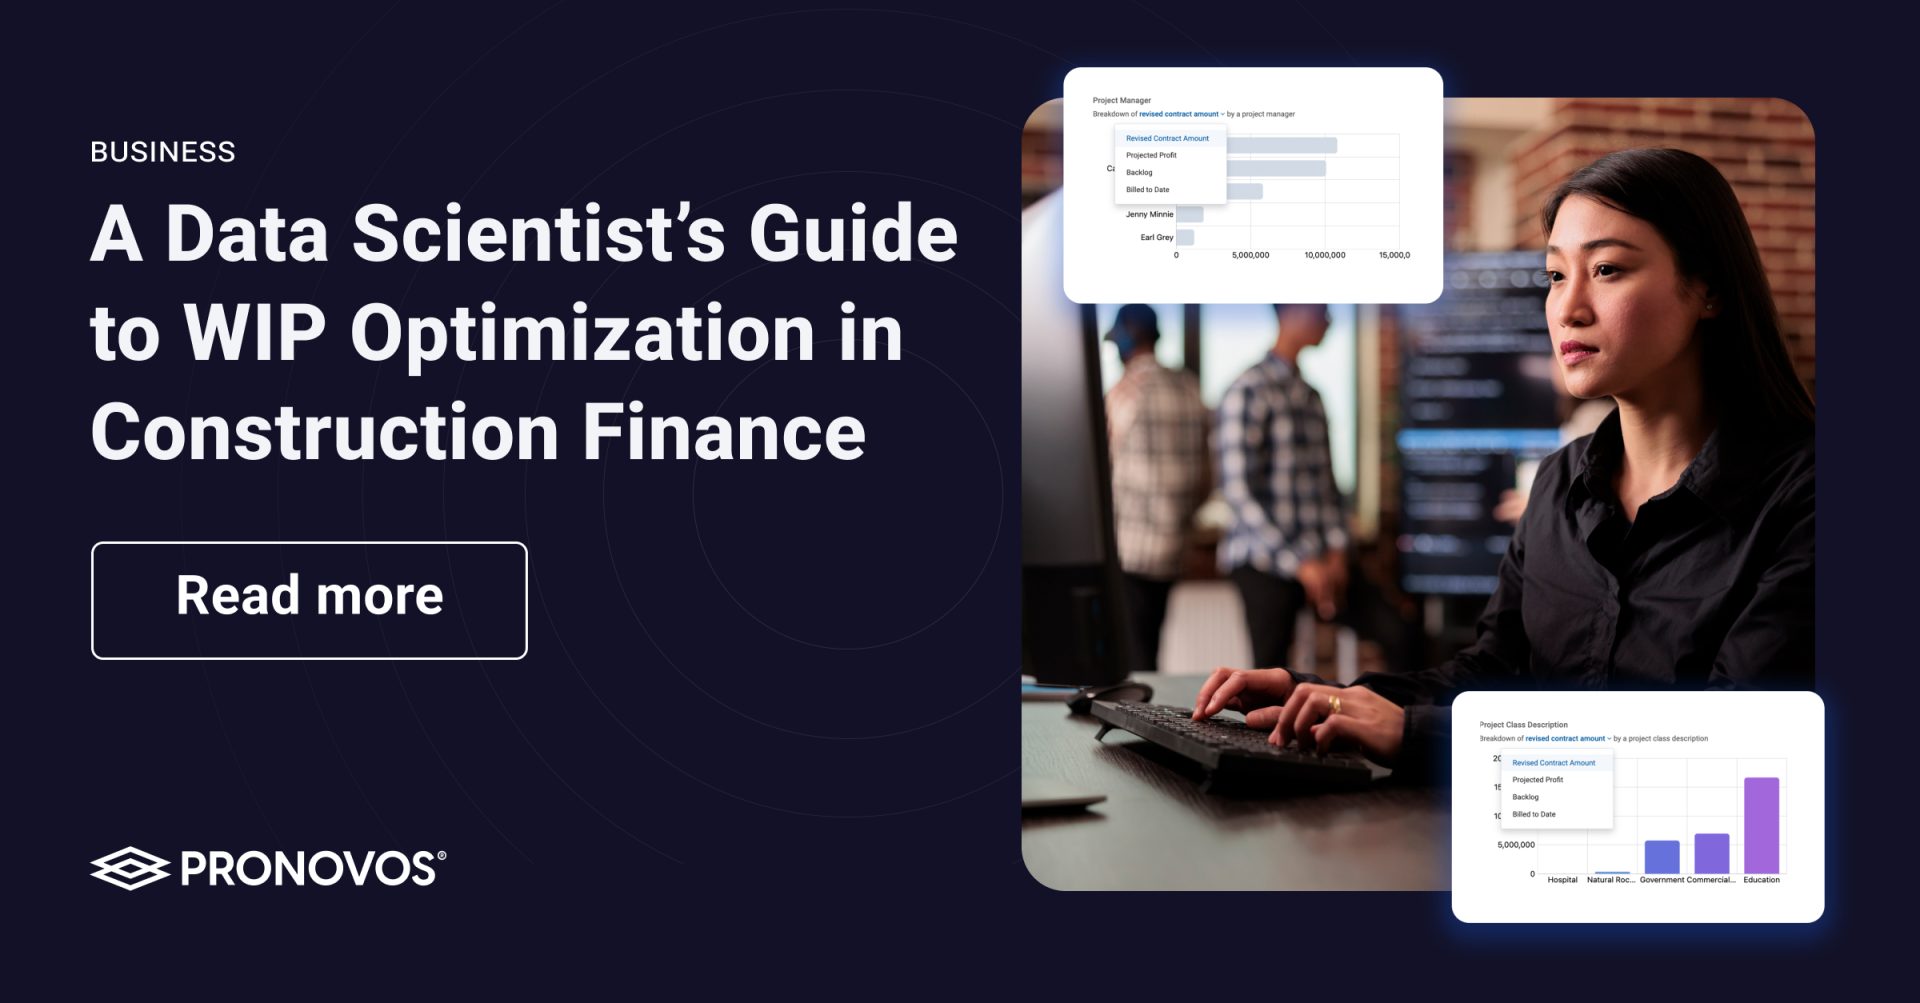 A Data Scientist’s Guide to WIP Optimization in Construction Finance